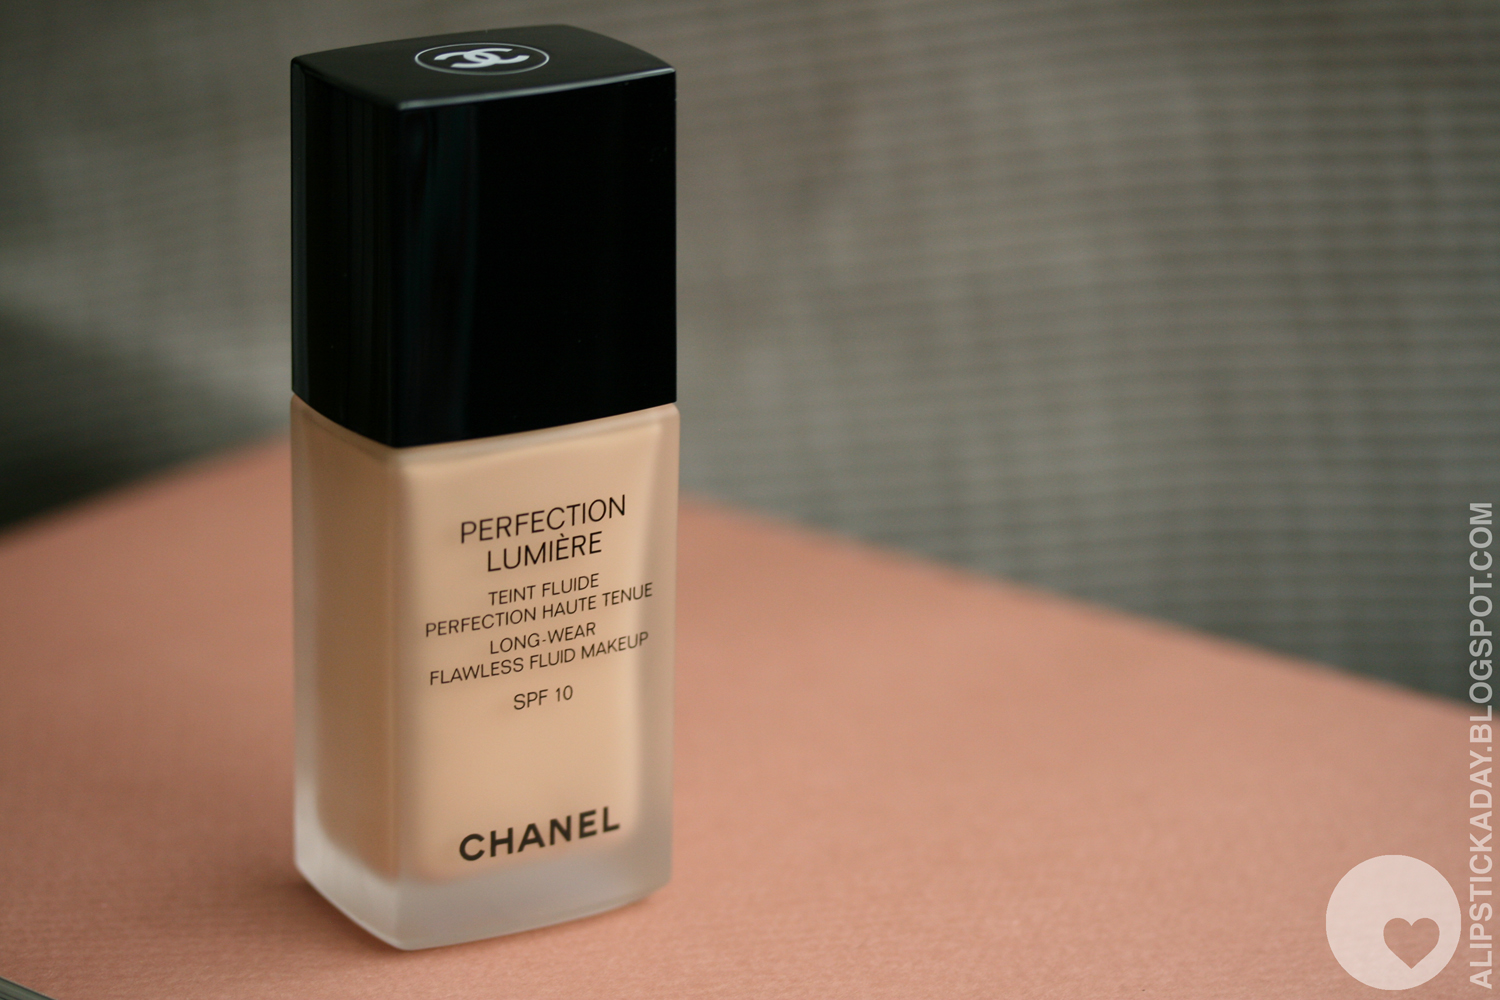 A LIPSTICK A DAY: Chanel Perfection Lumière Foundation